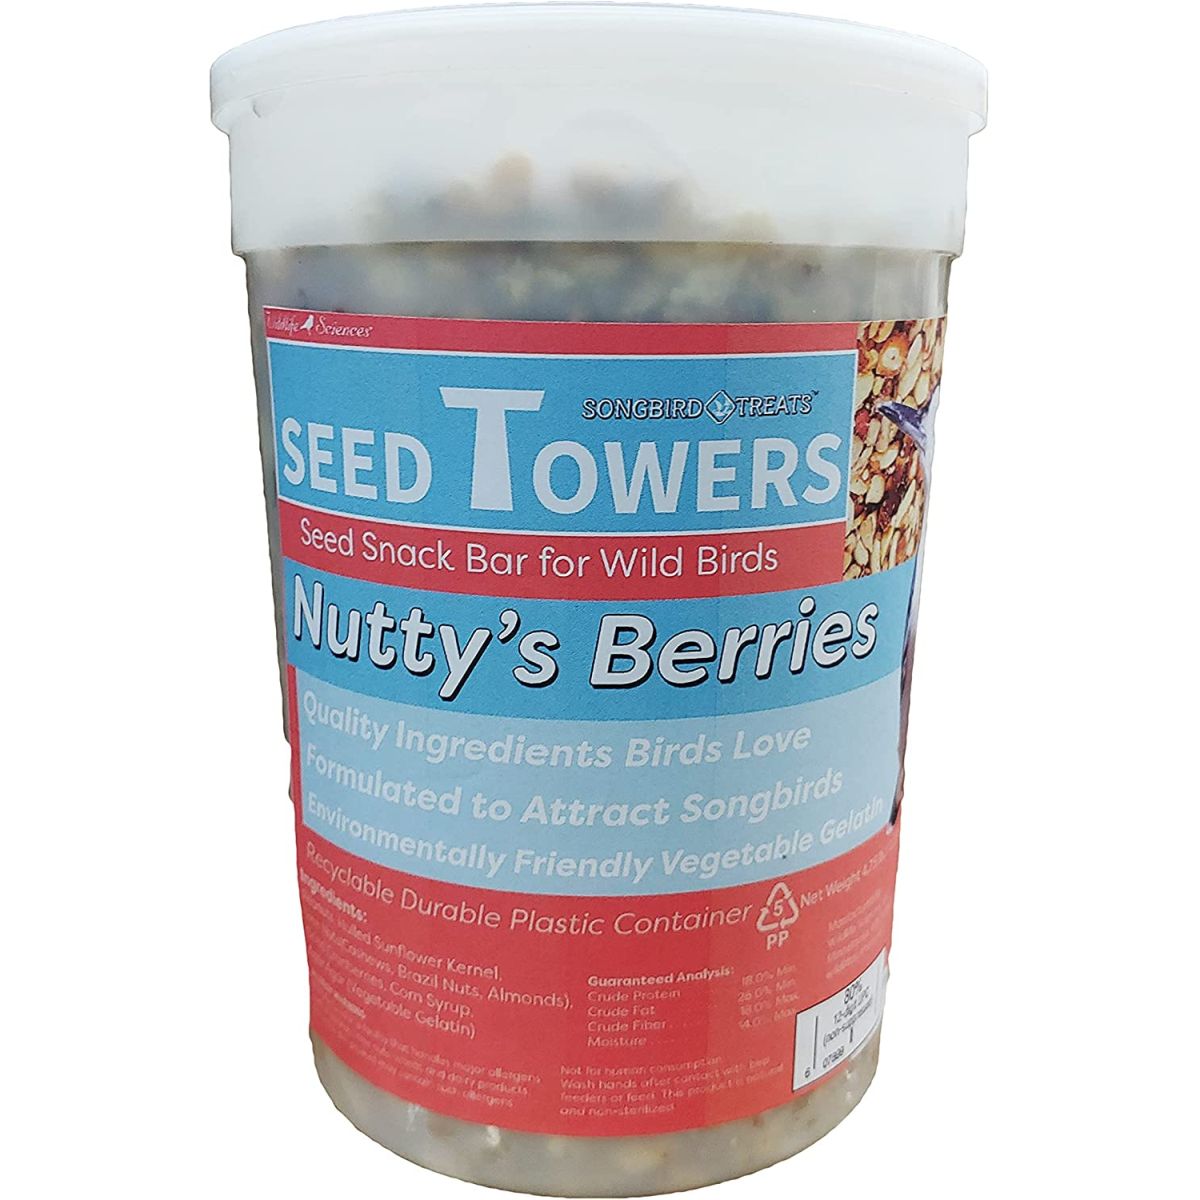 Seed Tower Nutty's Berries 34oz. 2/Pack